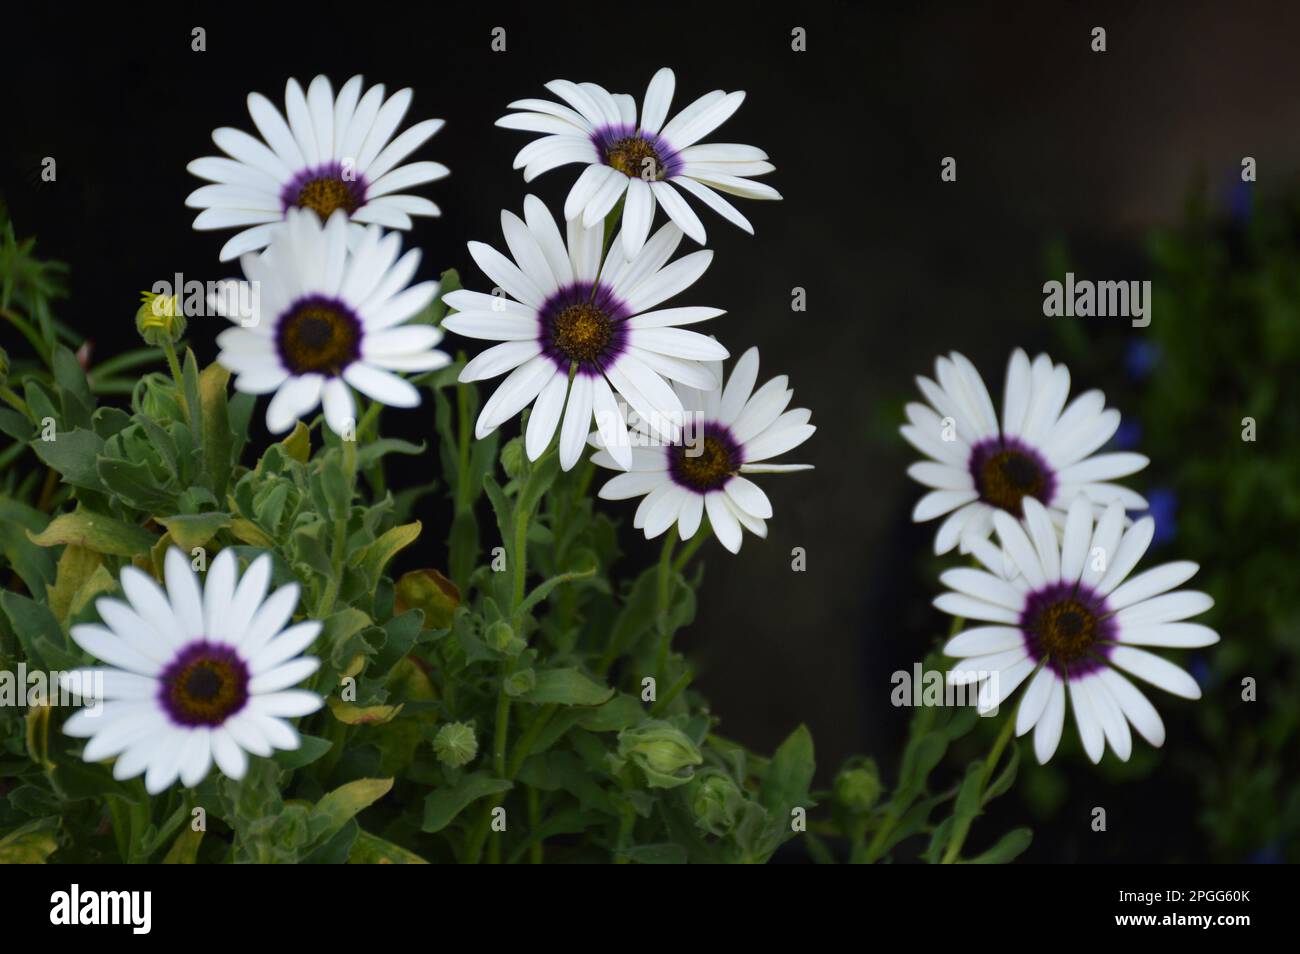 African daisy flowers growing in the garden Stock Photo